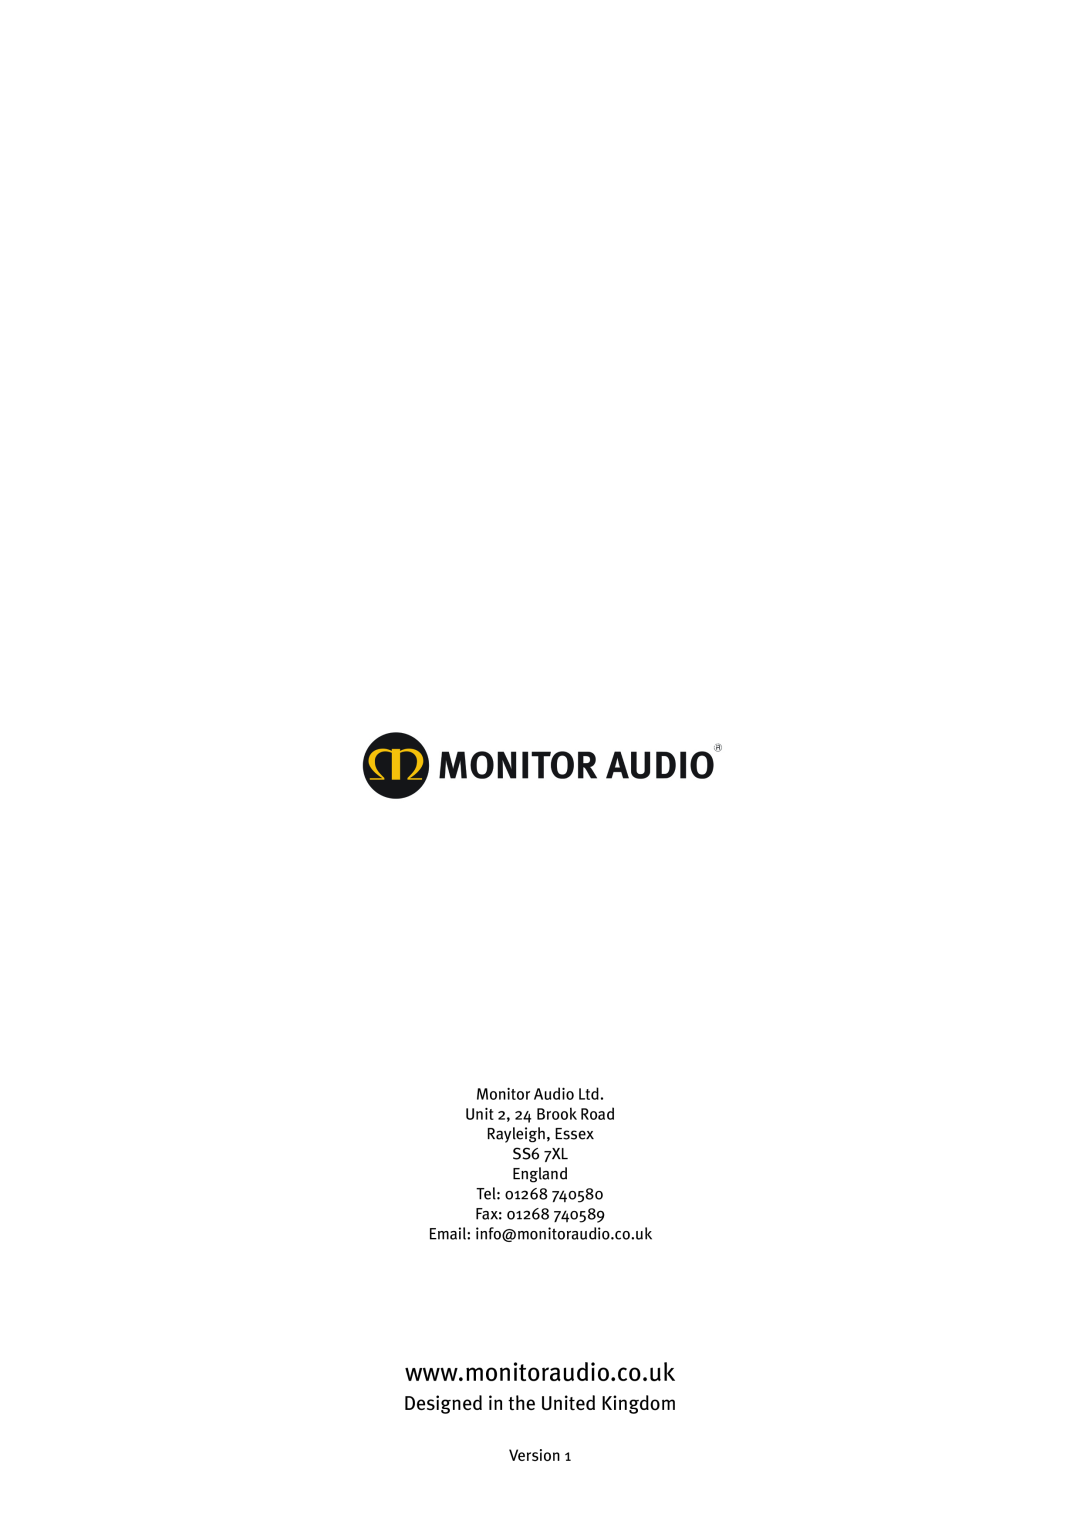 Monitor Audio GSW12 user manual Rayleigh, Essex SS6 7XL England Tel, Fax 01268 Email info@monitoraudio.co.uk, Version 